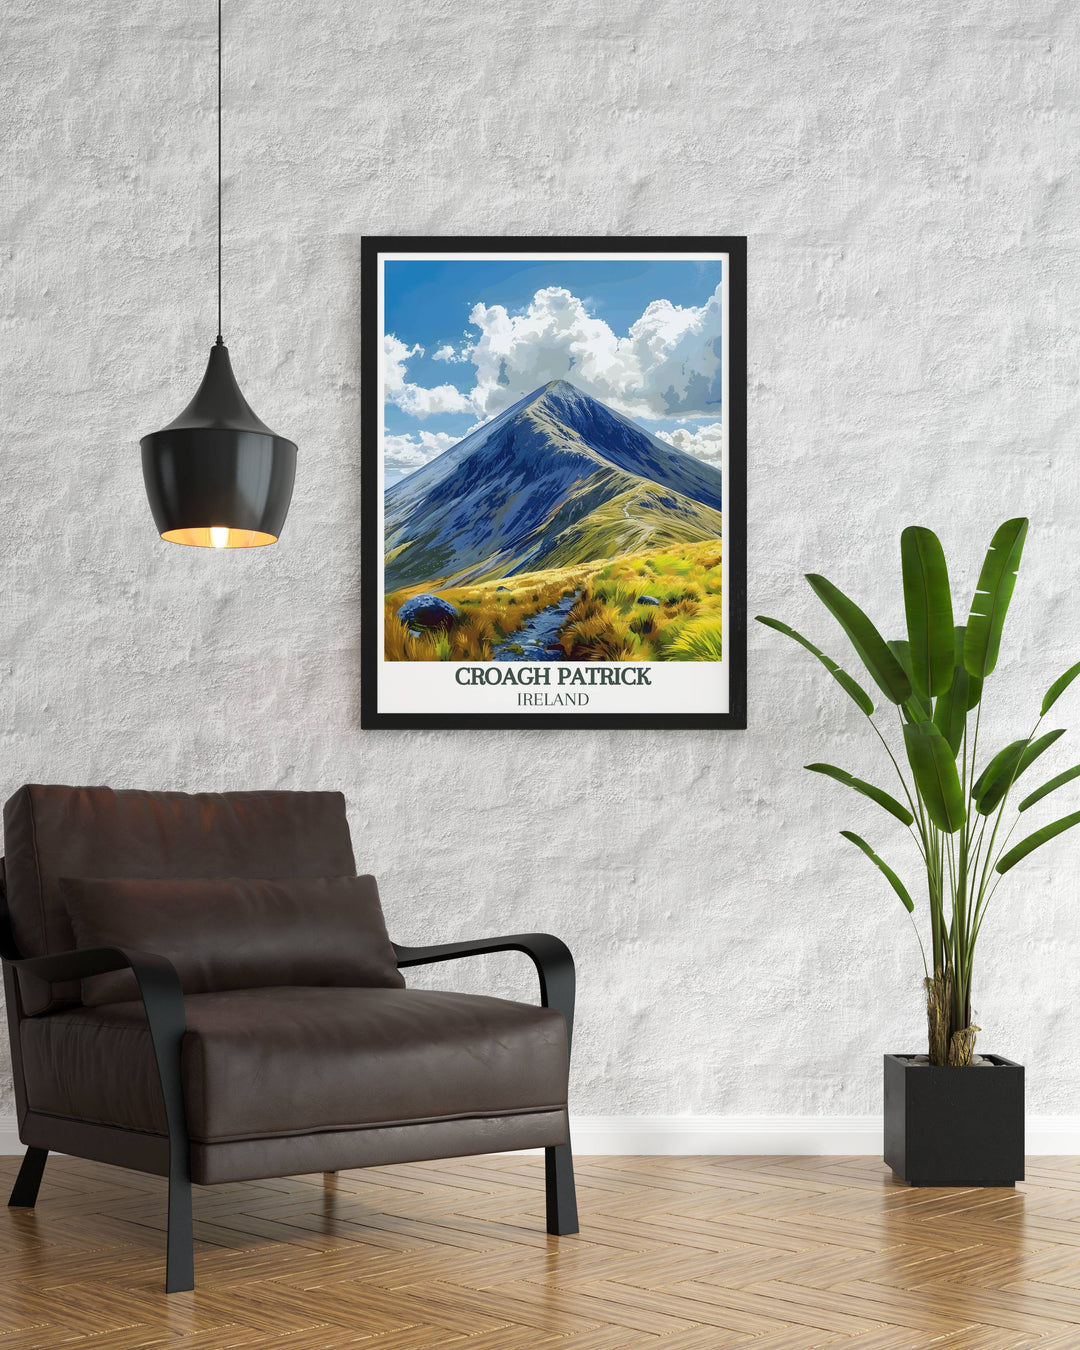 Discover the beauty and history of Croagh Patrick Summit with this vibrant travel poster featuring the majestic mountain. Perfect for those who love Ireland Catholic themes and the rich cultural heritage of Westport Ireland.